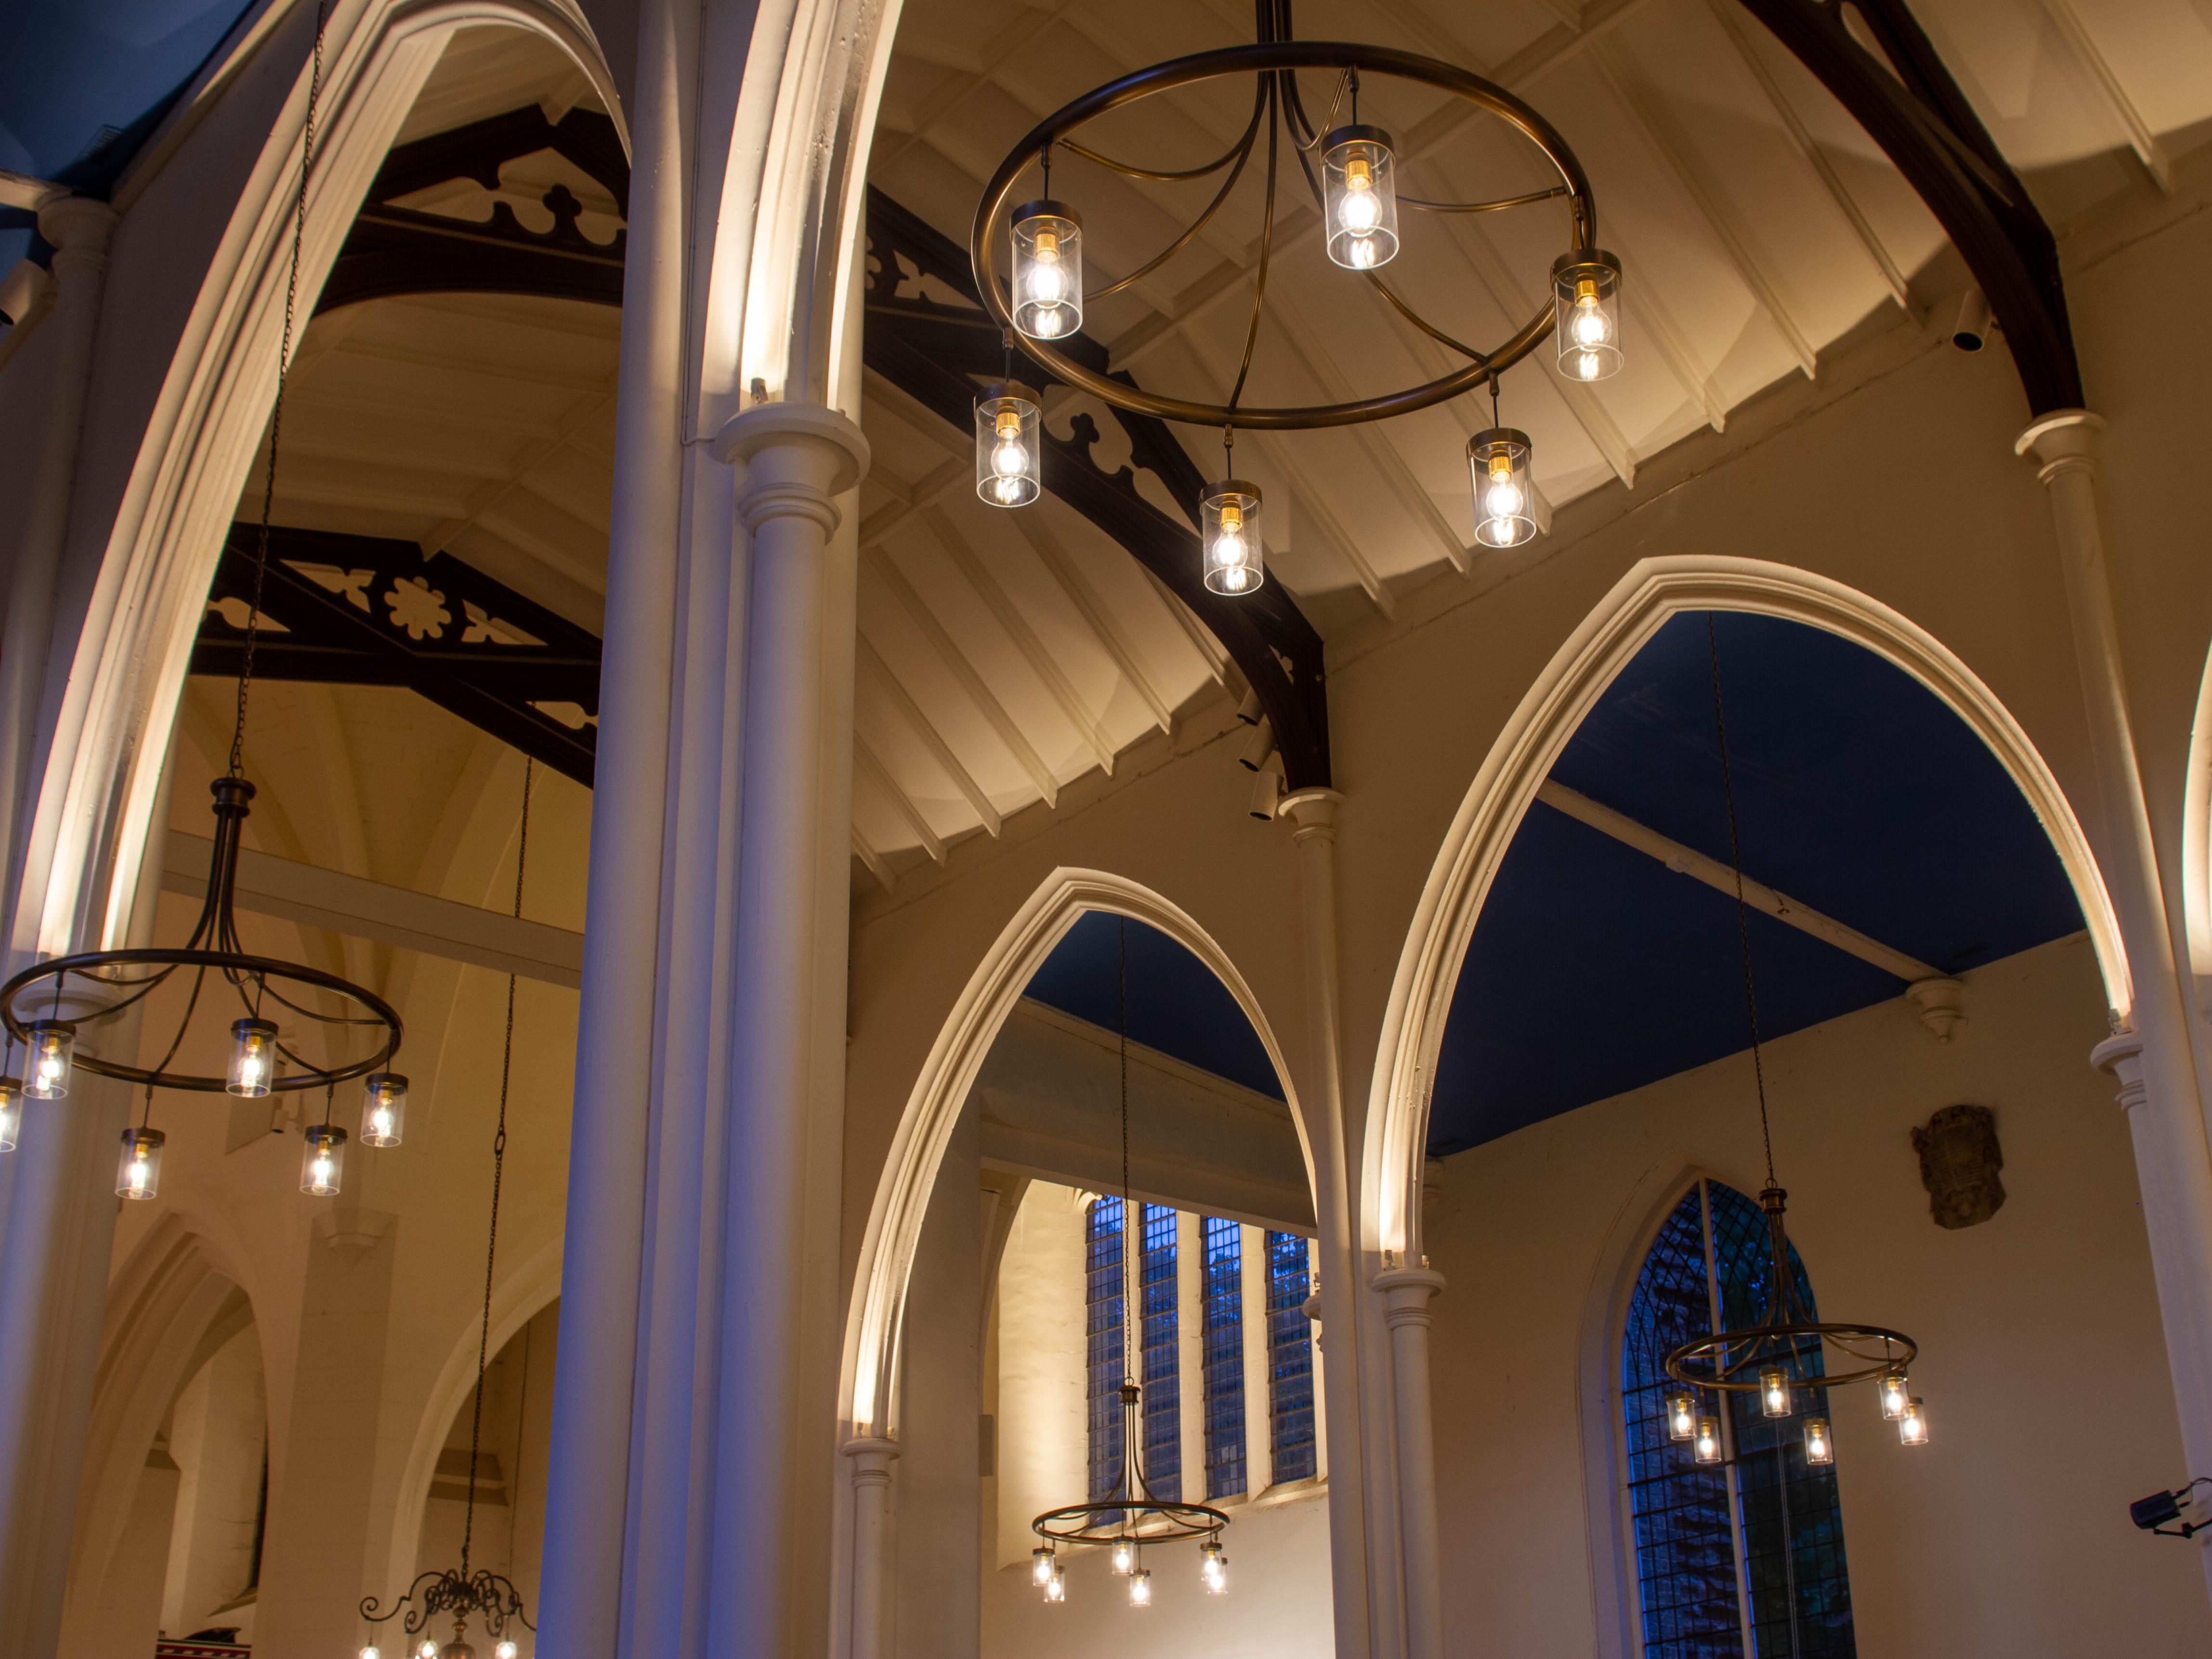 High ceilings in a gothic style church with antique chandeliers